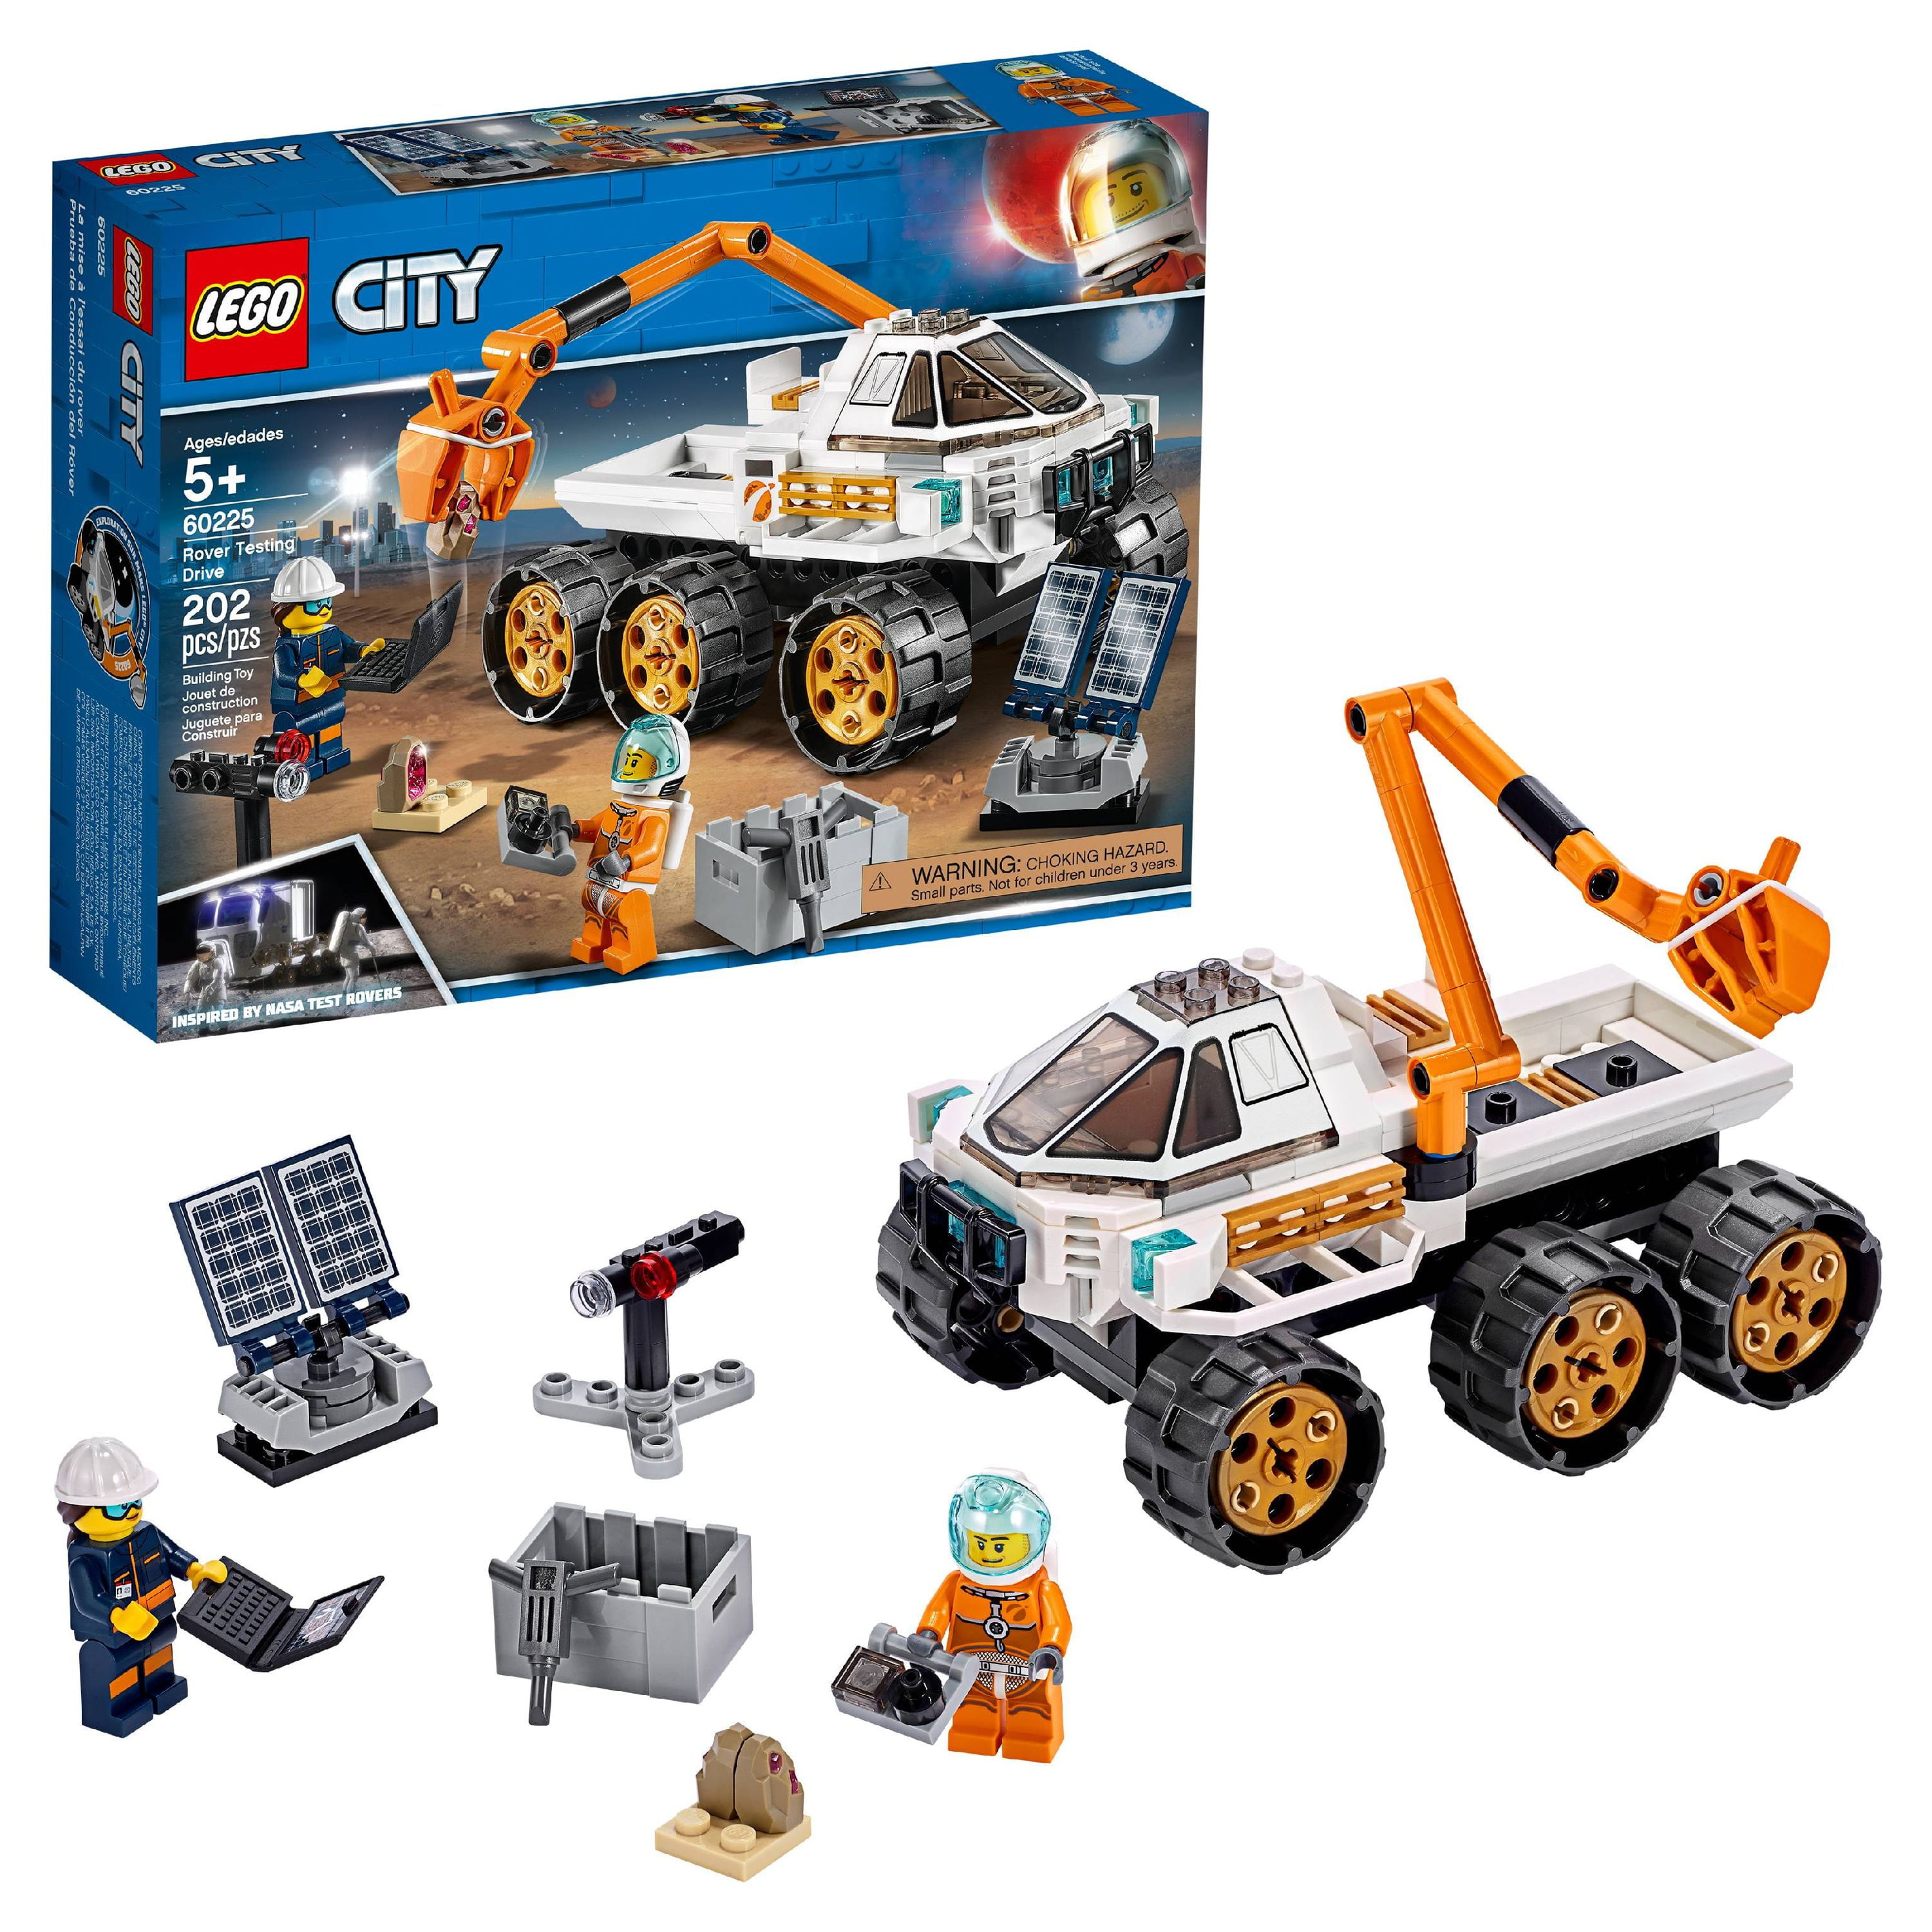 LEGO City Space Rover Testing Drive 60225 NASA-inspired Kit (202 Pieces) 